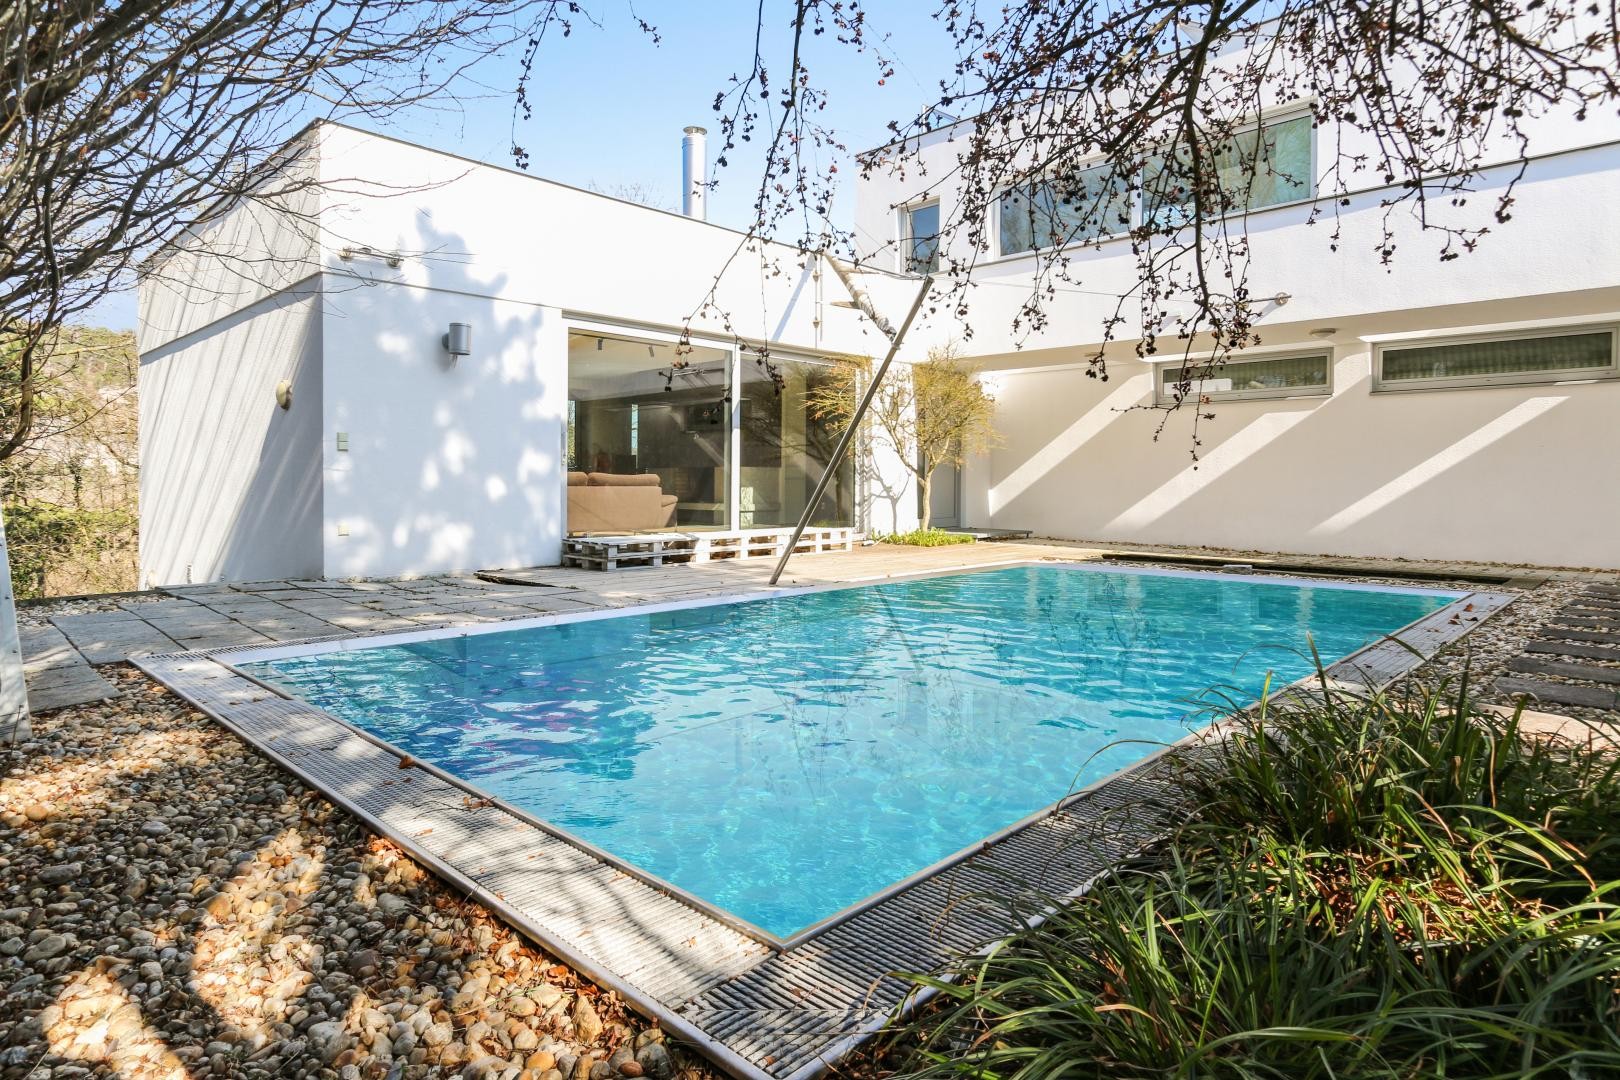 Thomas Immobilien- Moderne Familienvilla in Toplage